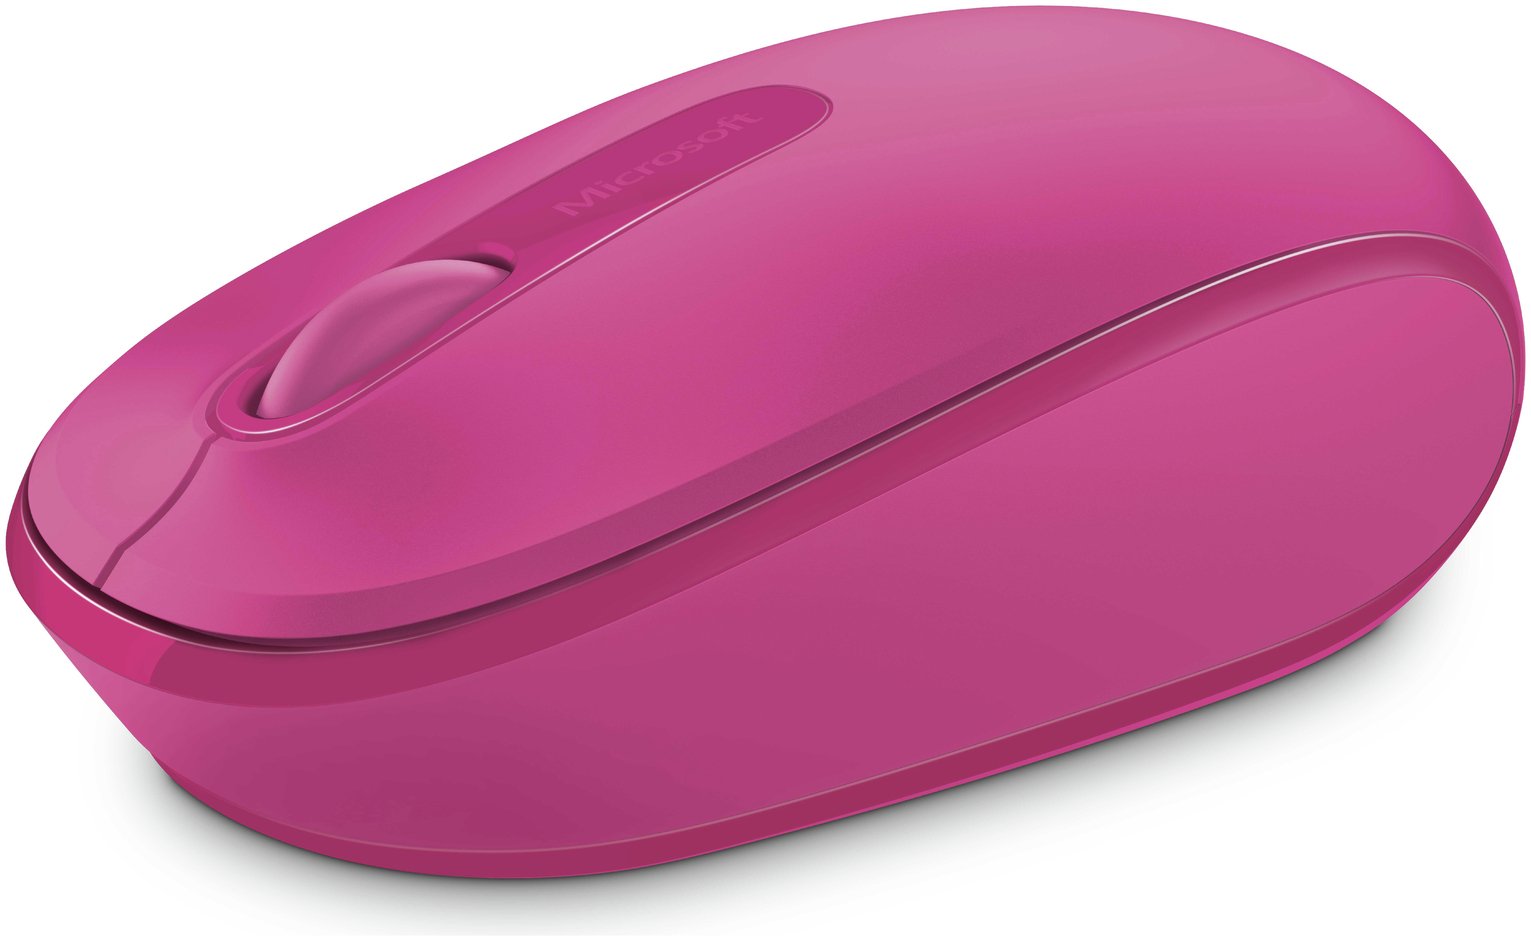 Microsoft 1850 Wireless Mobile Mouse Review